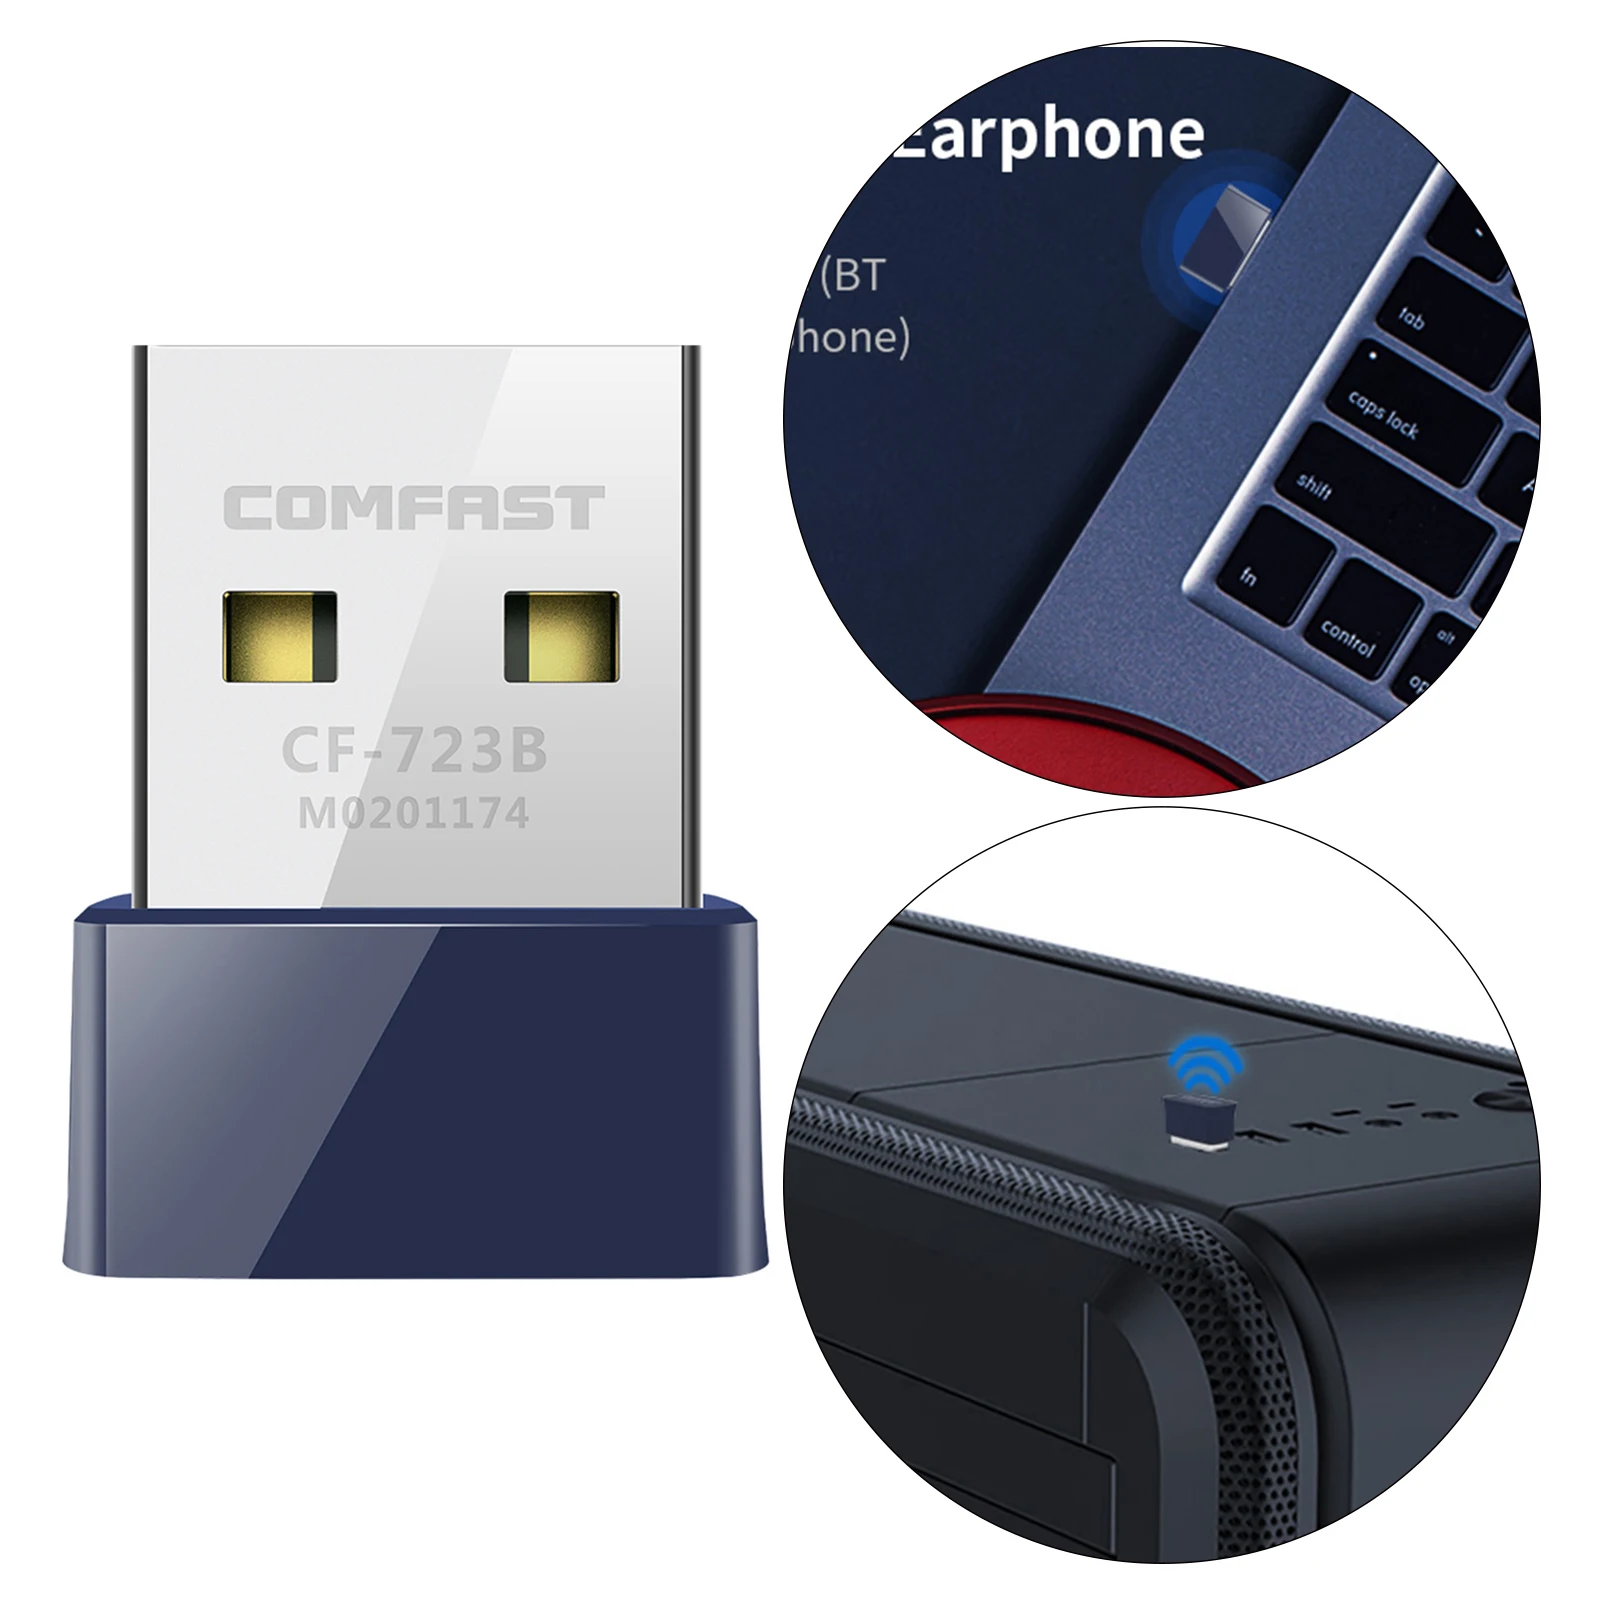 Wireless USB 2 in 1 WiFi Bluetooth Card External Network Dongle, Low Energy